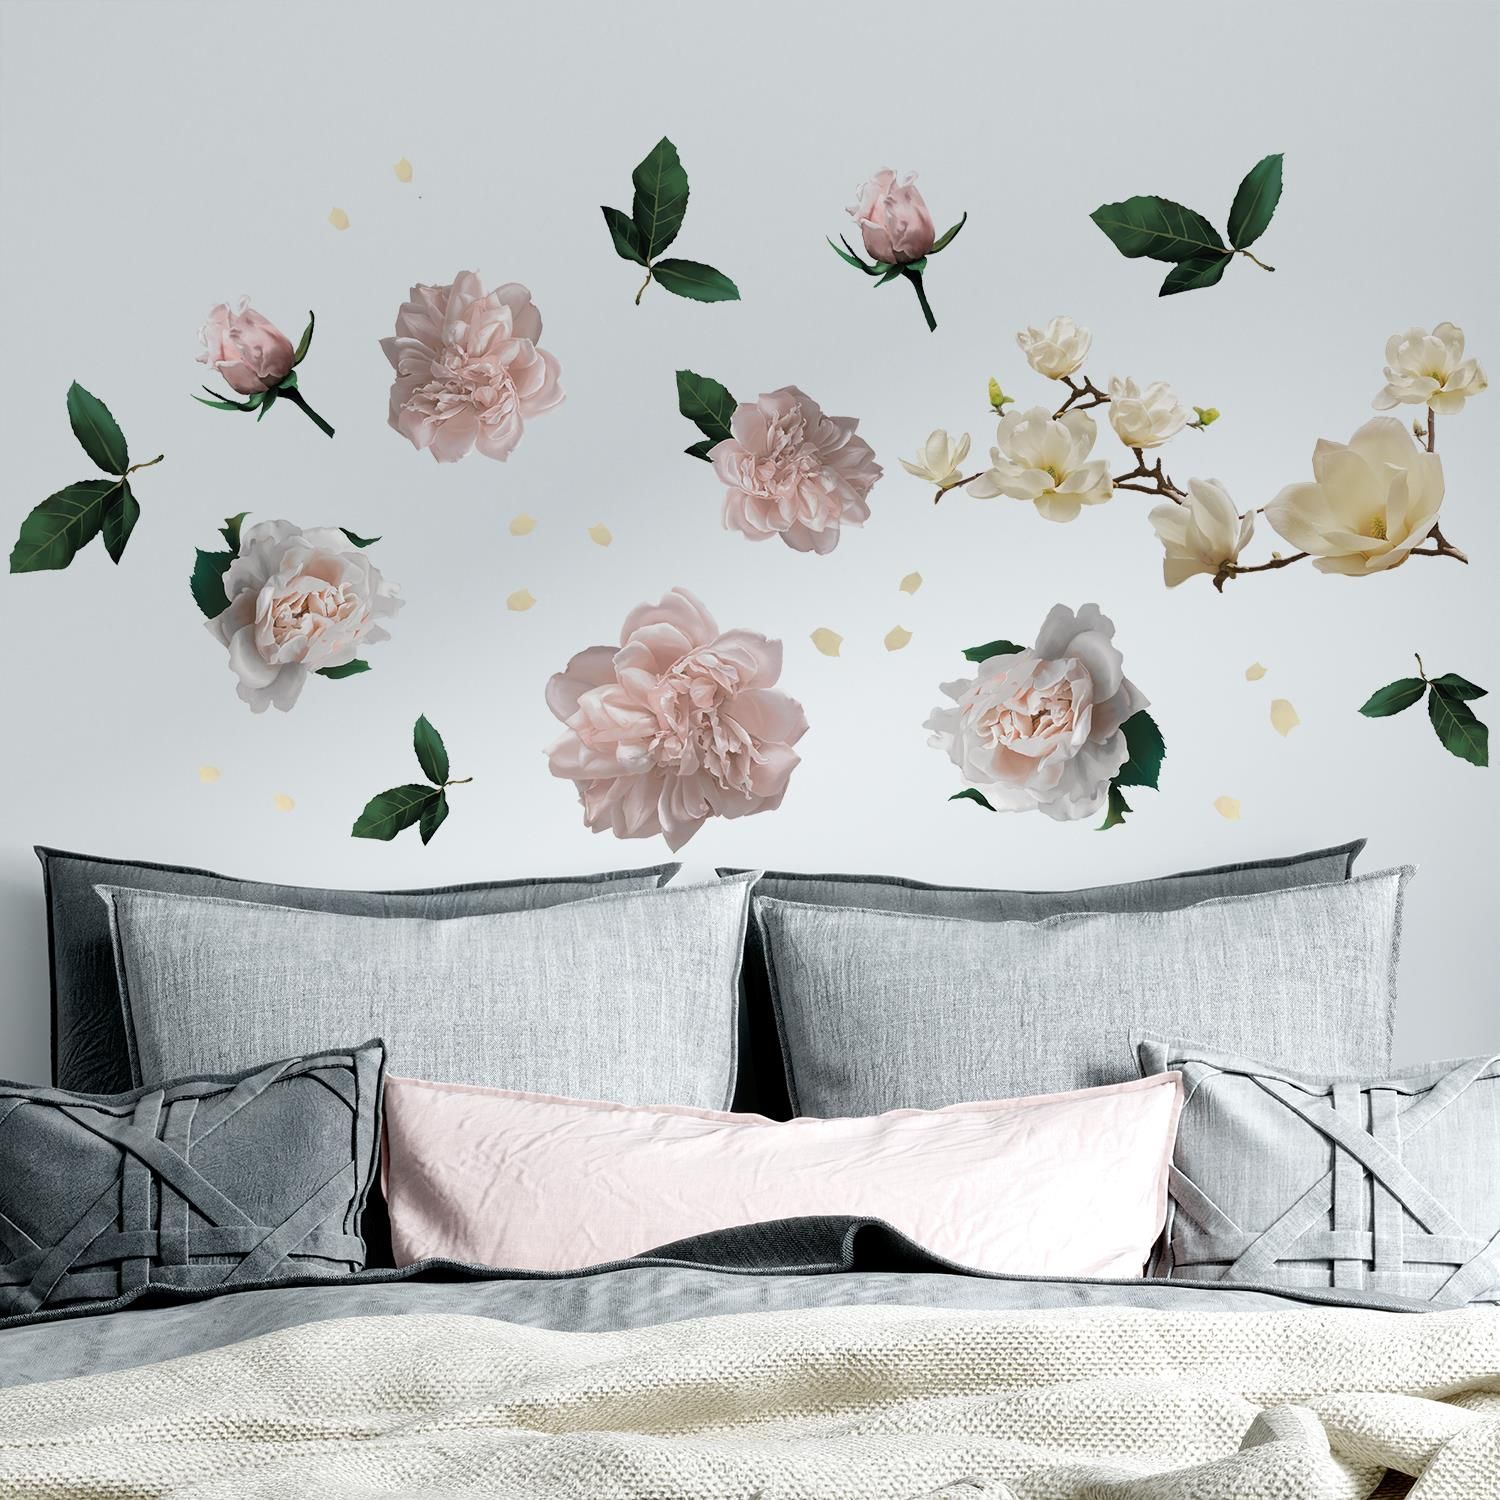 - Our classic floral wall mural will transform your home in seconds! To apply, just peel and stick onto any clean, flat surfaces like wall, furniture or as window screen, and you are good to go!
- Easy to install and to remove without leaving a trace. Can be easily trimmed / cut to fit. 
- Application Notes: Please only attach to the painted surface at least three weeks after painting and clean the surface prior to application. 
- Stickers applied on laminated or wallpapered surfaces cannot be removed. 
- DO NOT APPLY in places with direct contact to fire! Please note: Your monitor color may vary from the actual product. 
- Package Contains: 1 sheet of 30 x 60 cm and 1 sheet of 60 x 90 cm with 38 pieces of stickers. Finishing size: 207 x 151 cm or 81.4 x 59.4 inches.